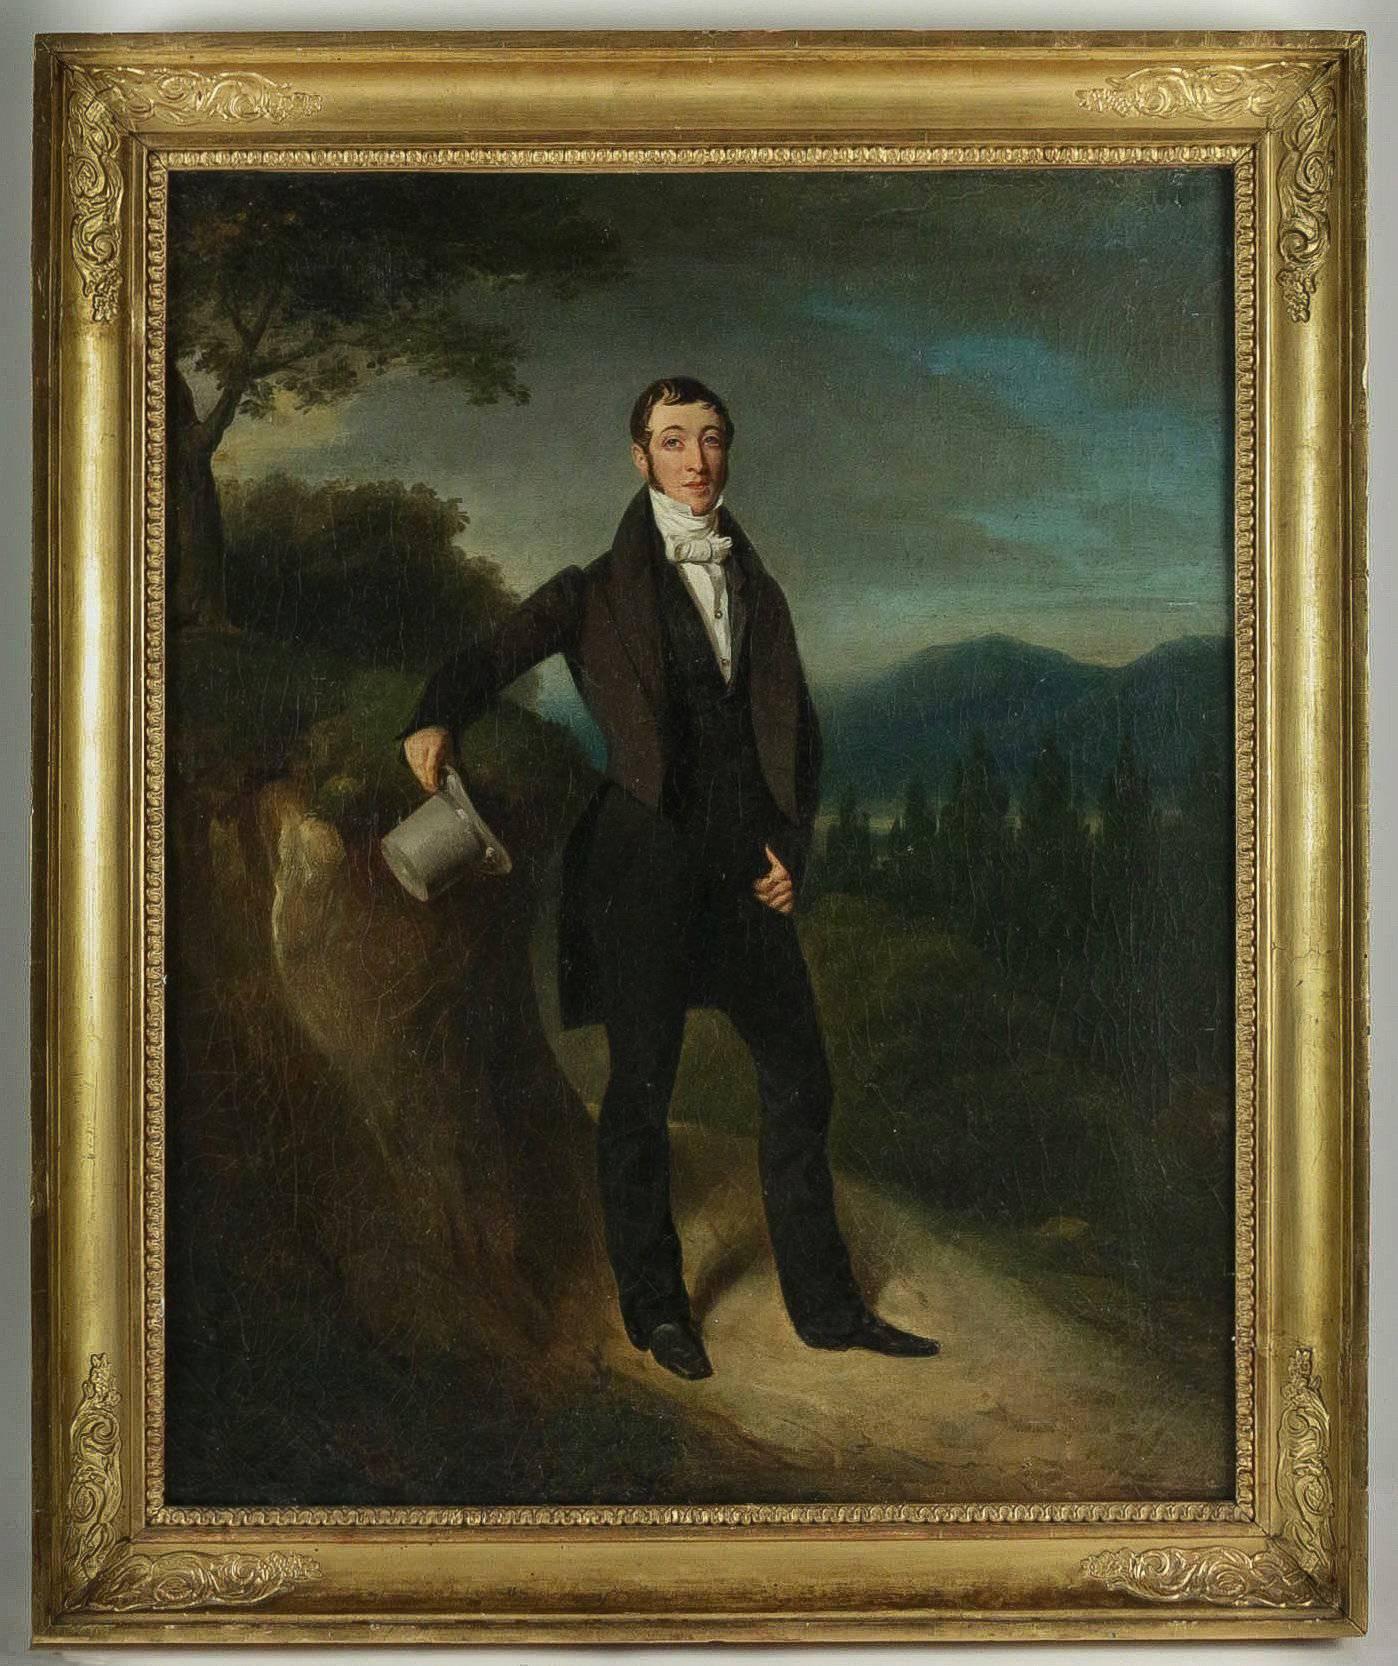 An attractive and representative portrait, of the French Restoration period.

Our painting, attributed to Pierre Duval le Camus depicts us the Portrait of an Elegant Man with a Hat in a landscape. 
Early-19th century, French Restauration period